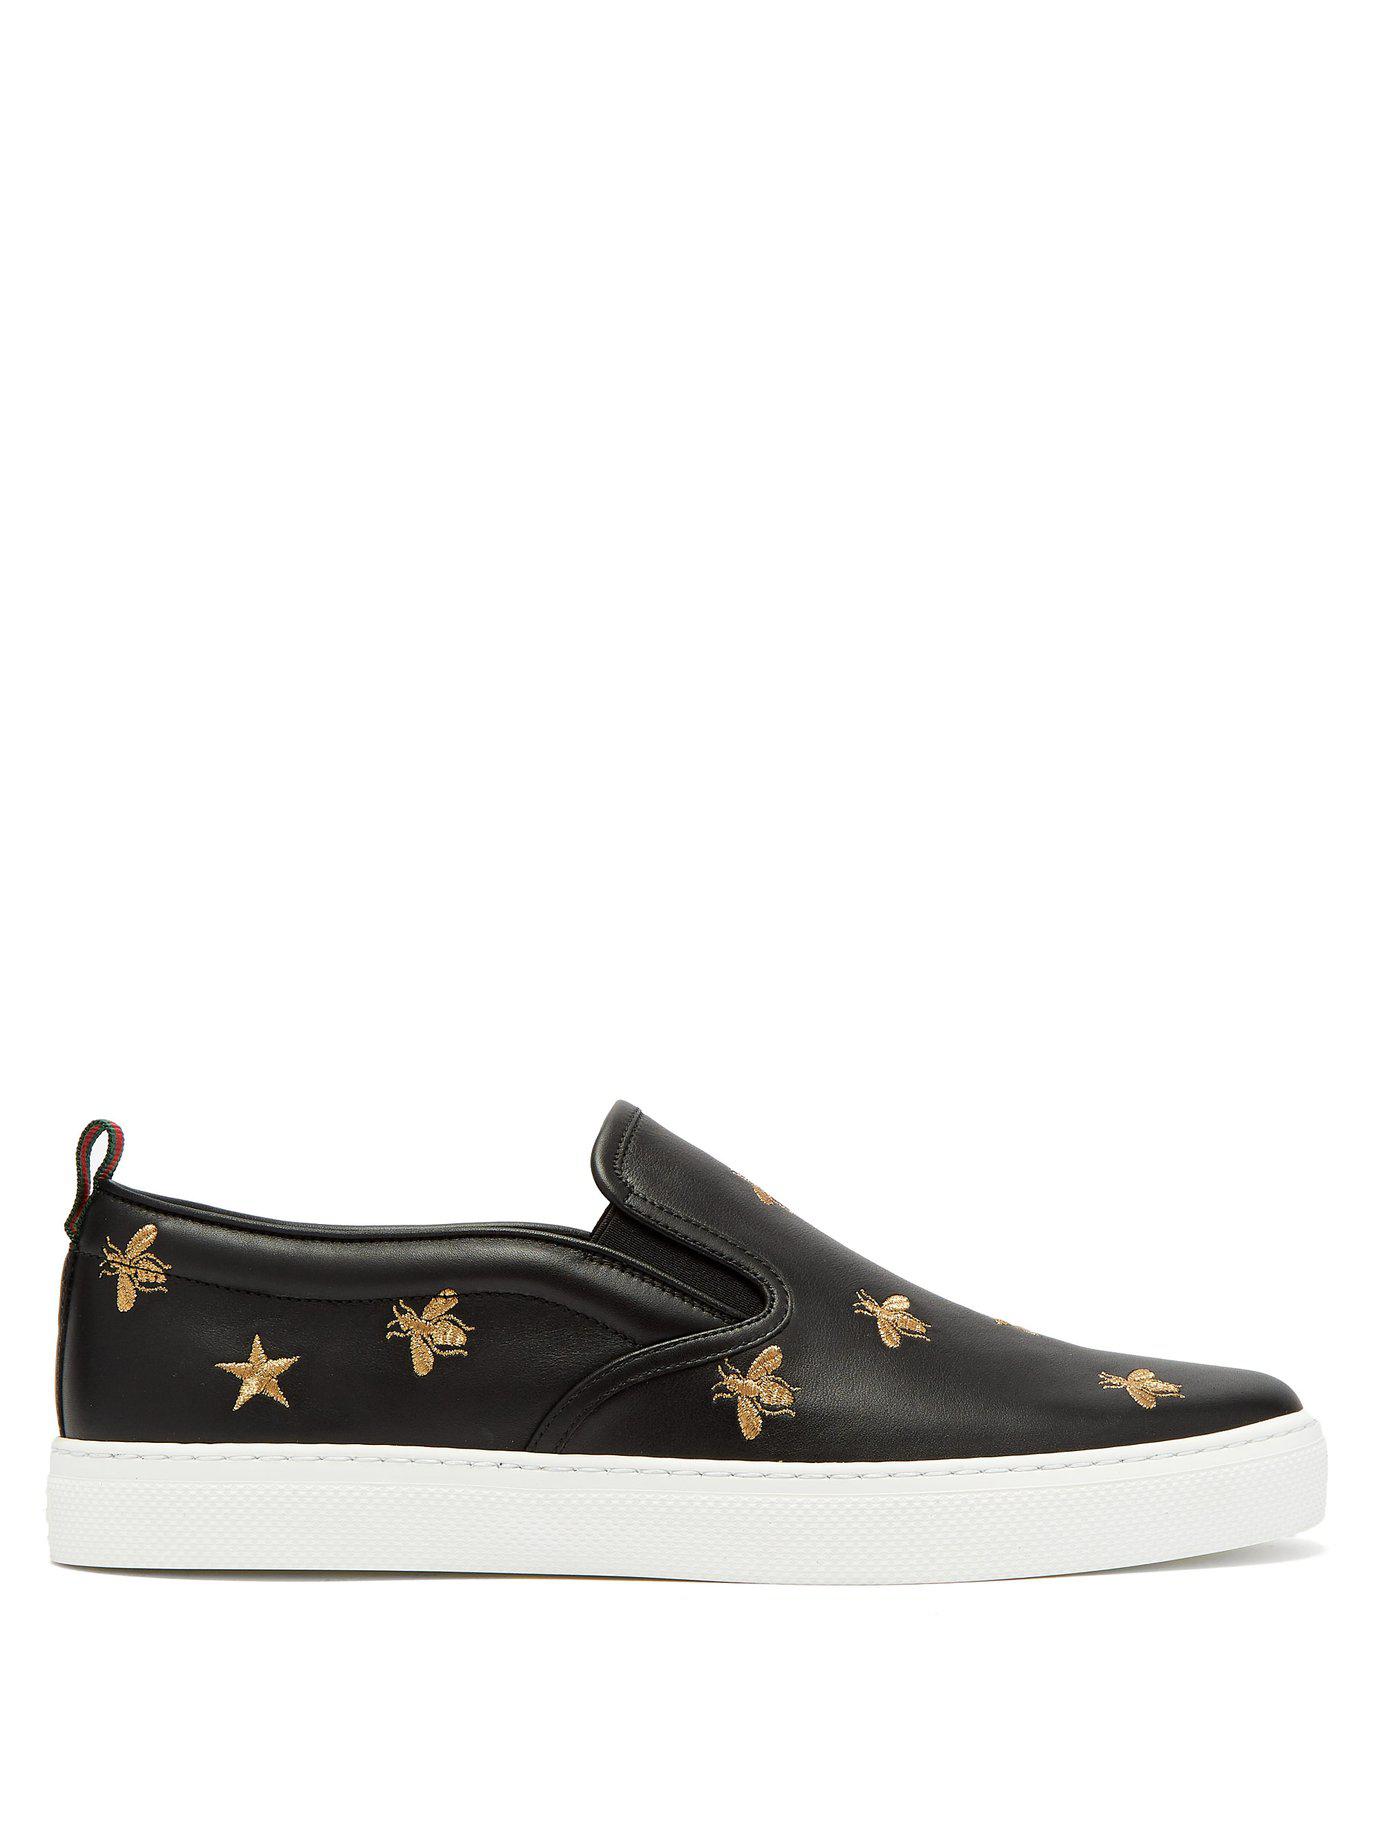 Gucci Leather Slip-on Sneakers With Bees in Black for Men | Lyst